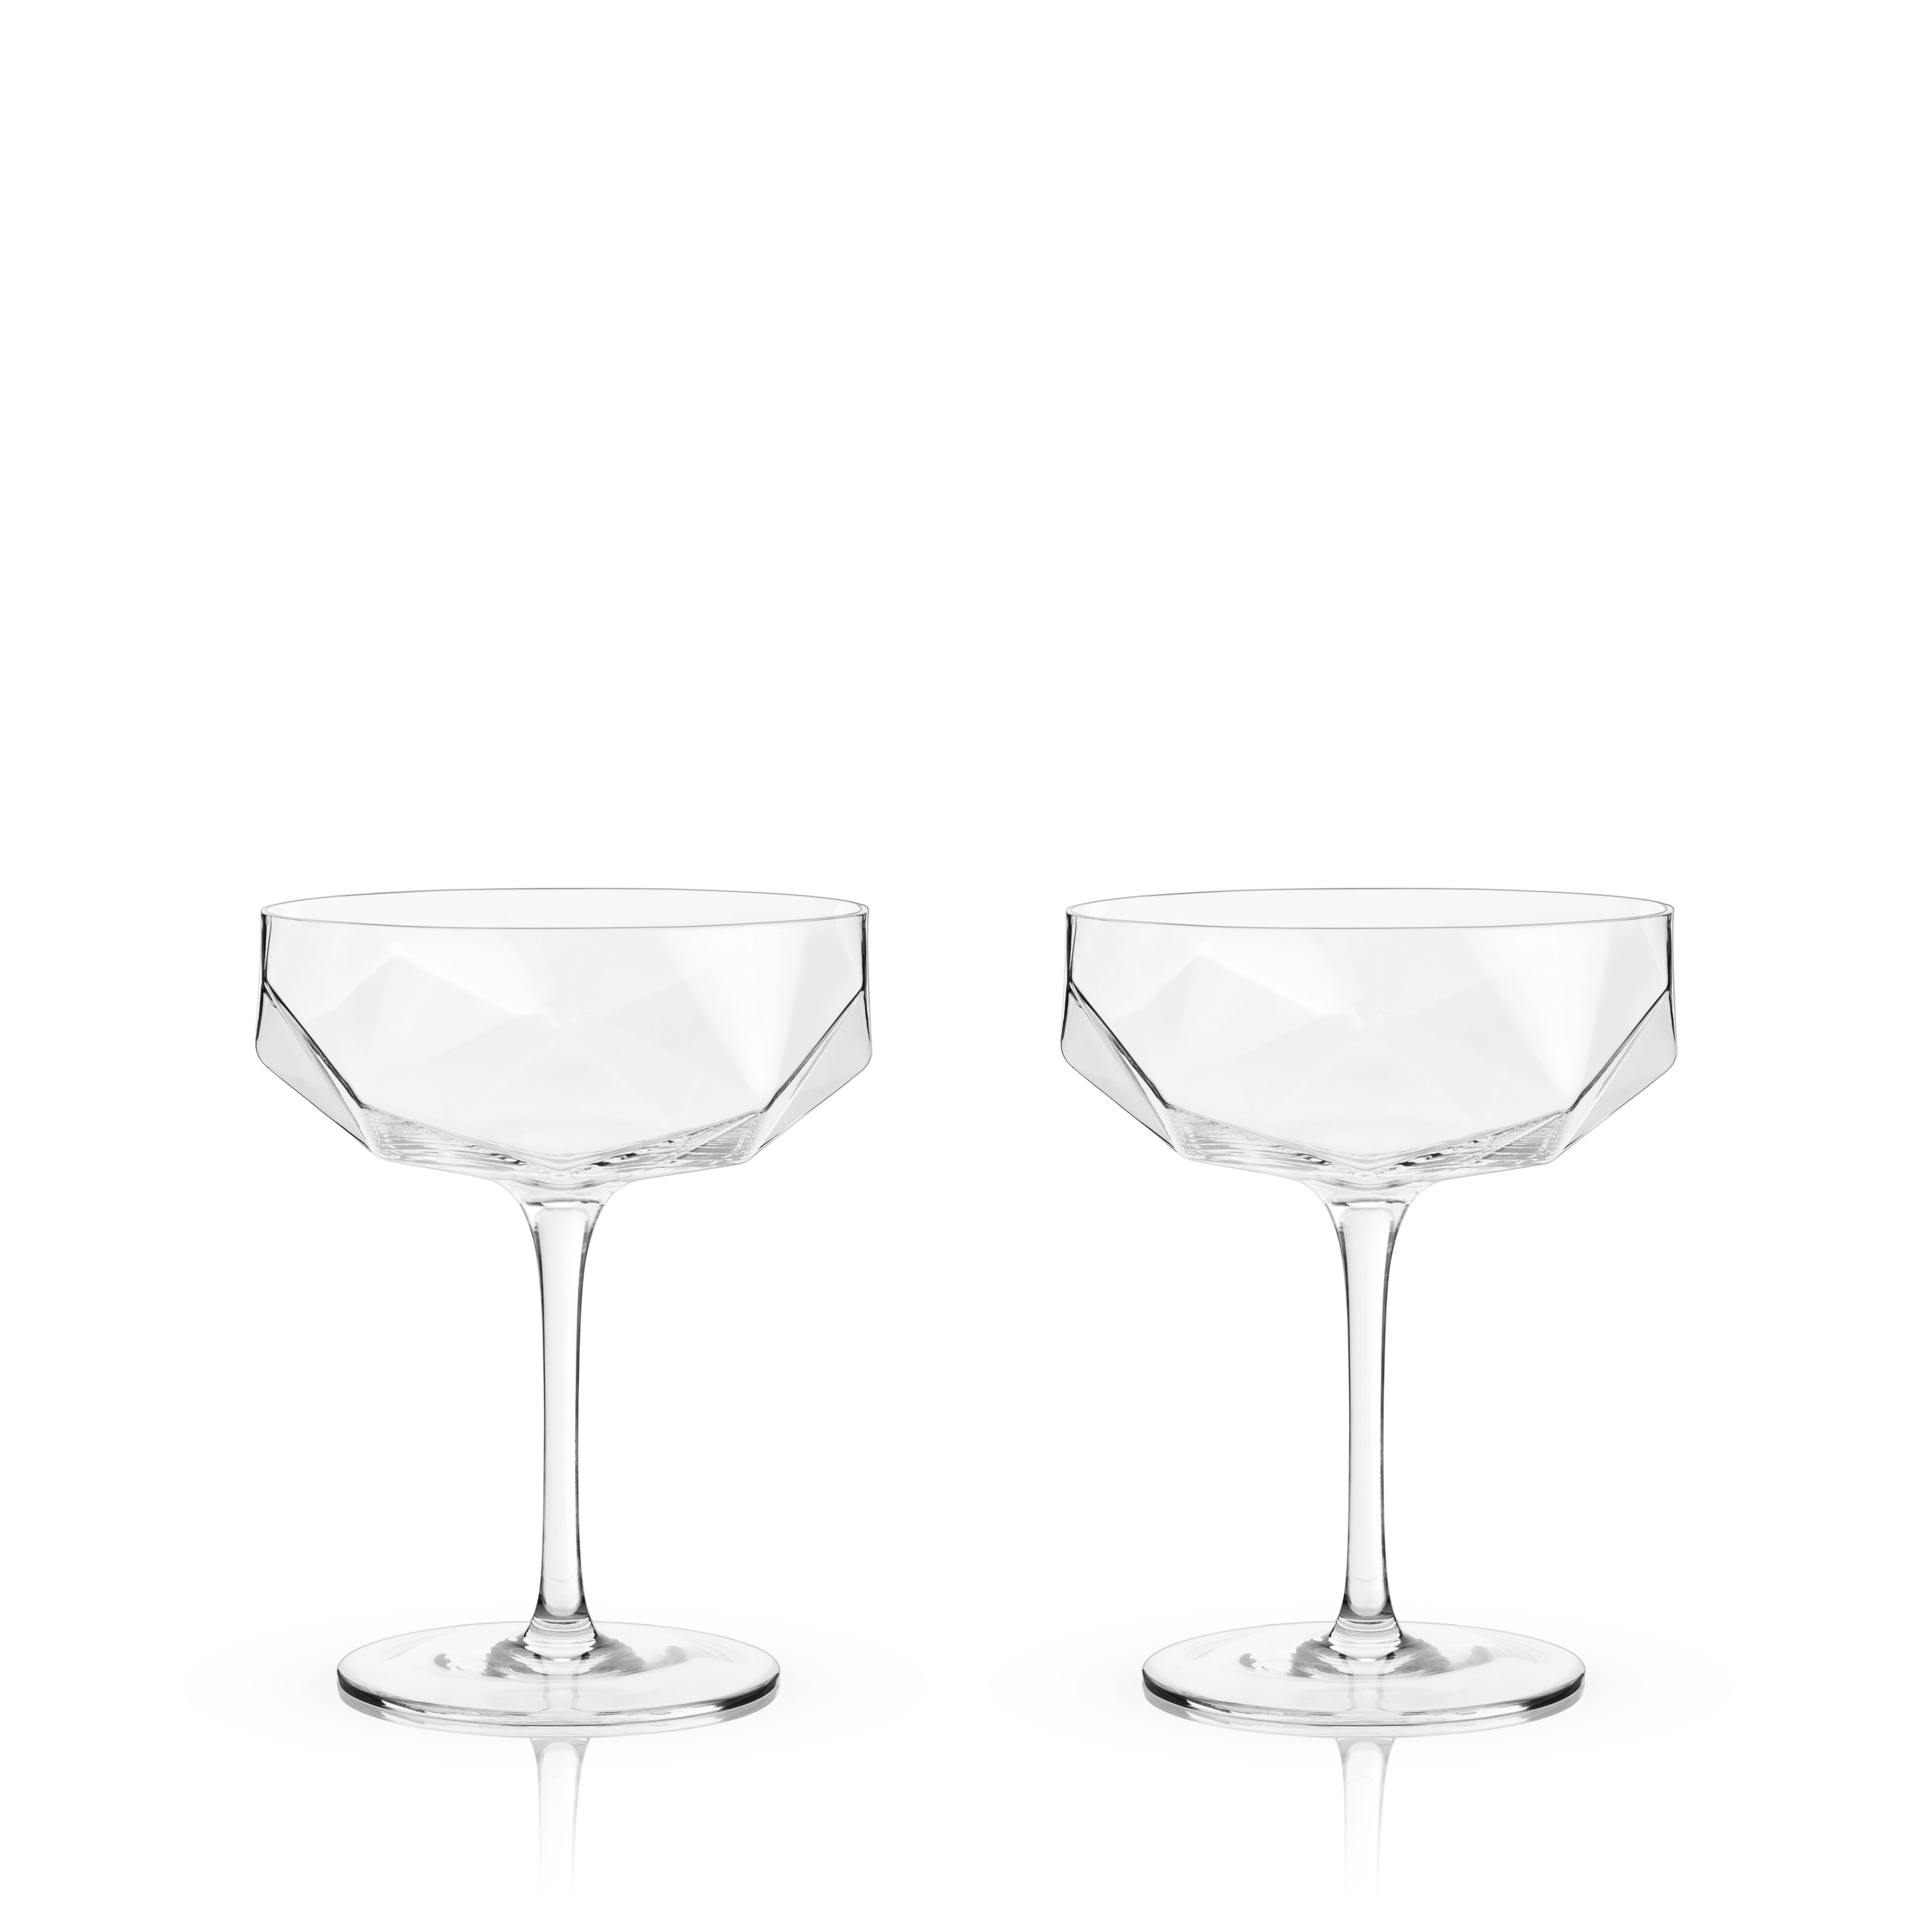 Angled Crystal Coupe Glasses (set of 4) by Viski®, Pack of 1 - Fry's Food  Stores